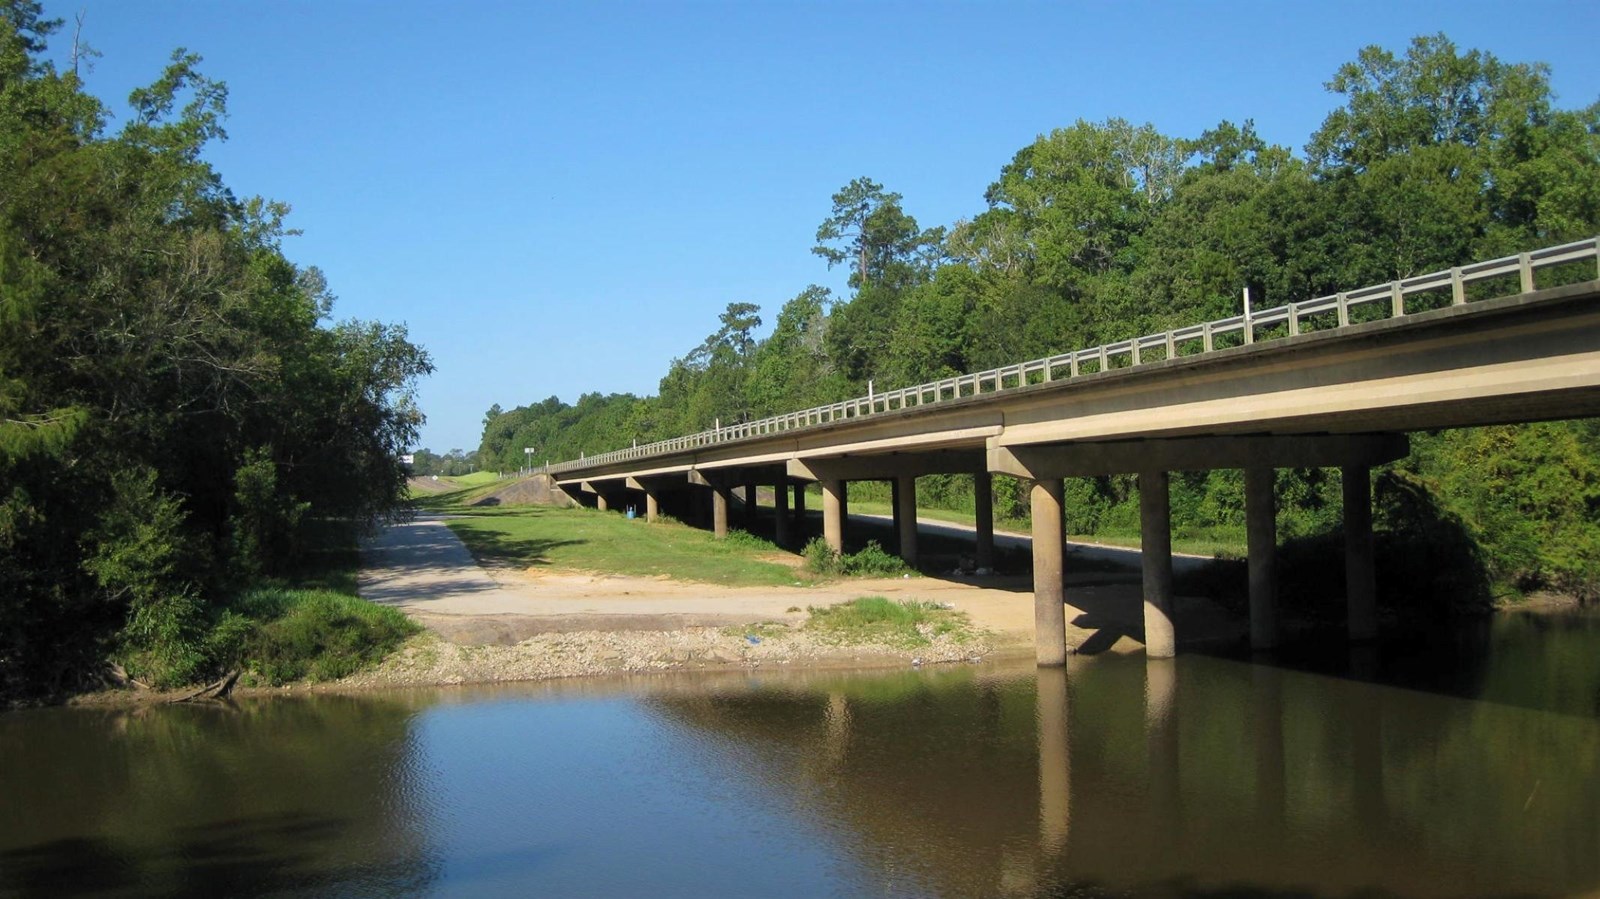 highway bridge over a river and sandy boat launch area